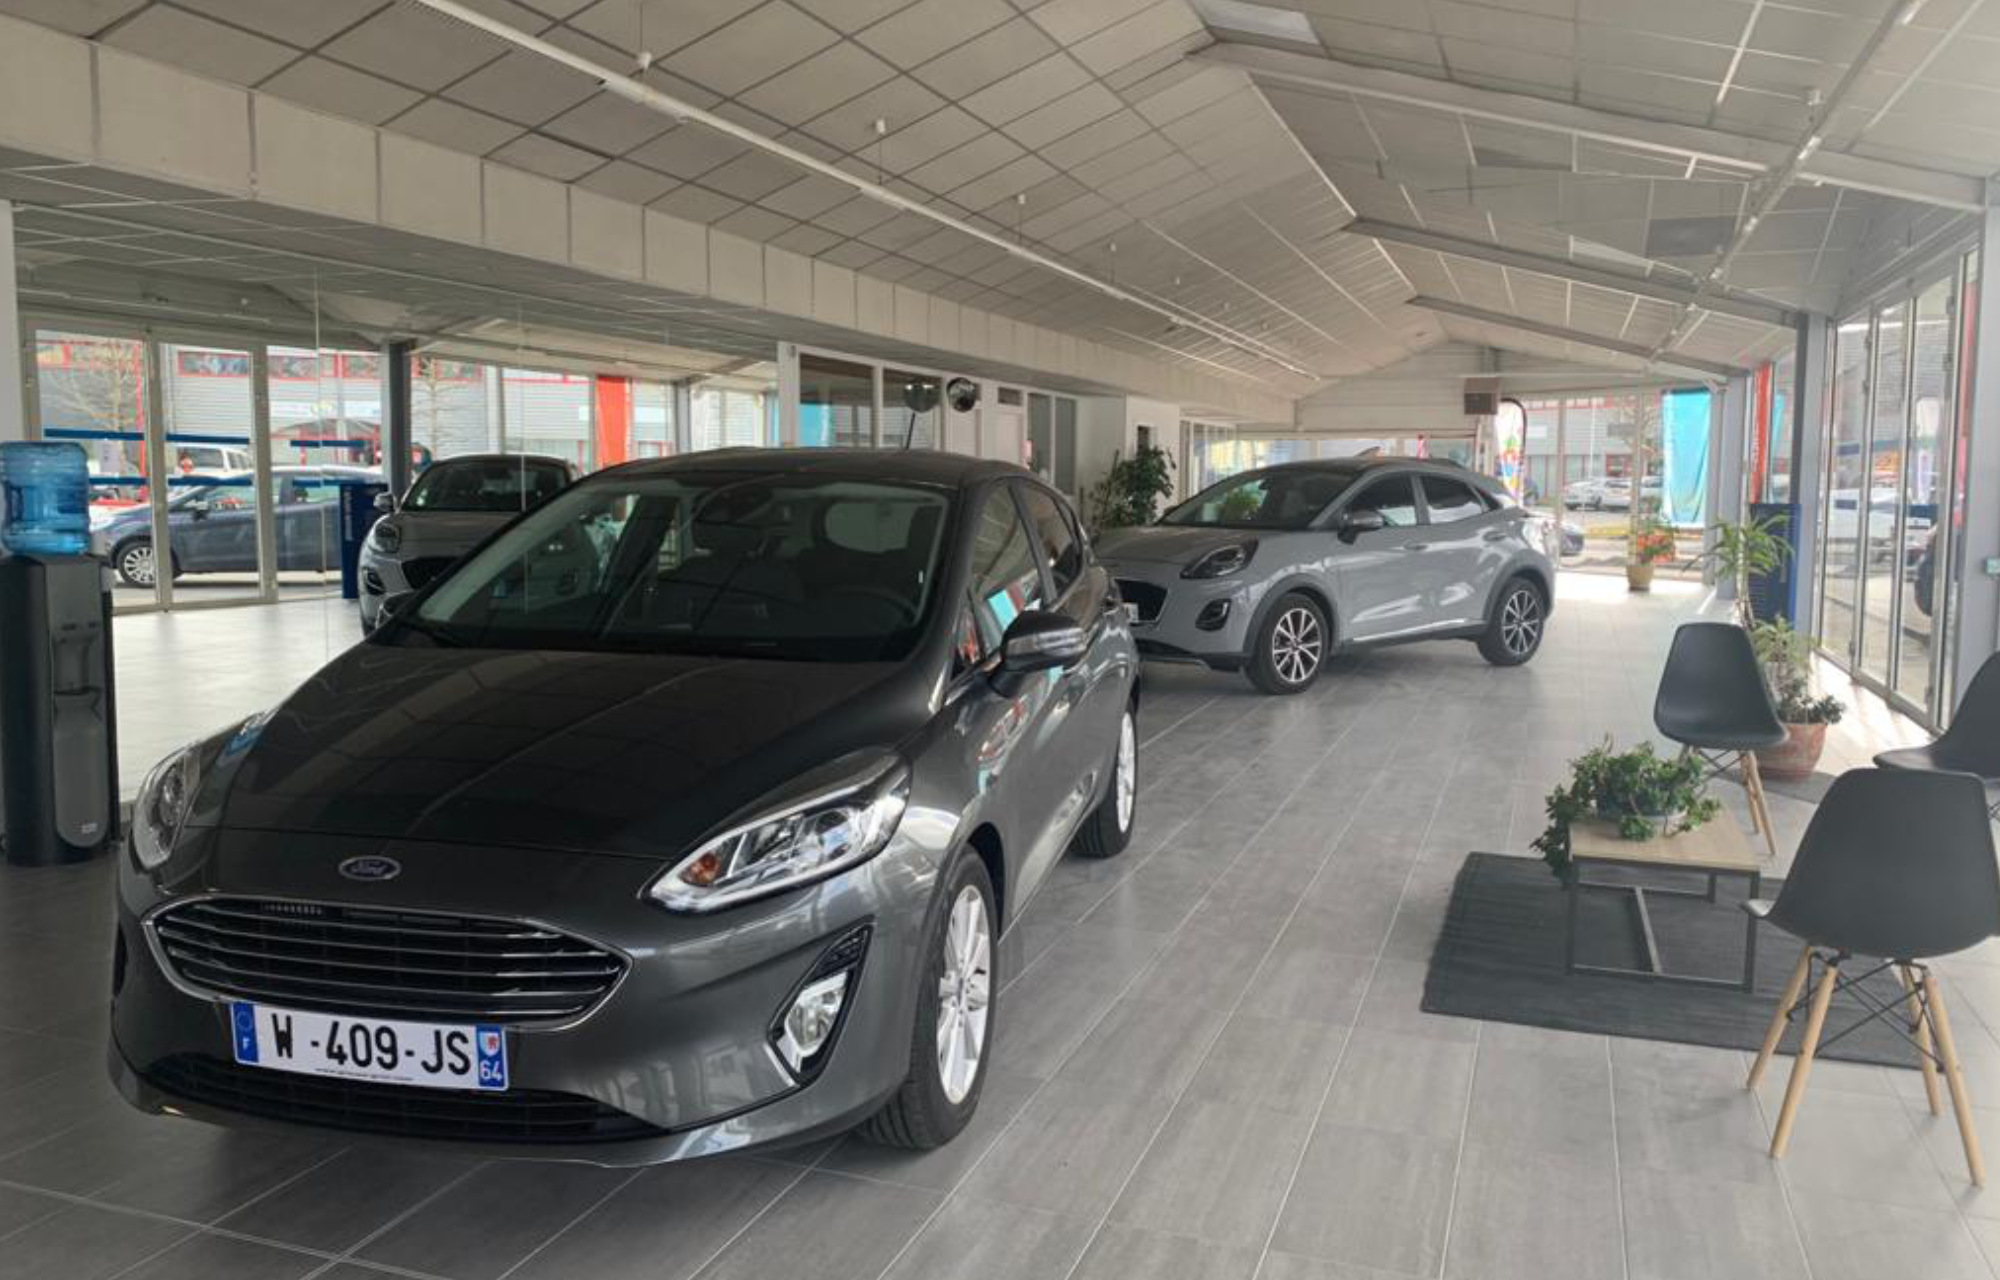 ABL AUTOMOBILES FORD HENDAYE